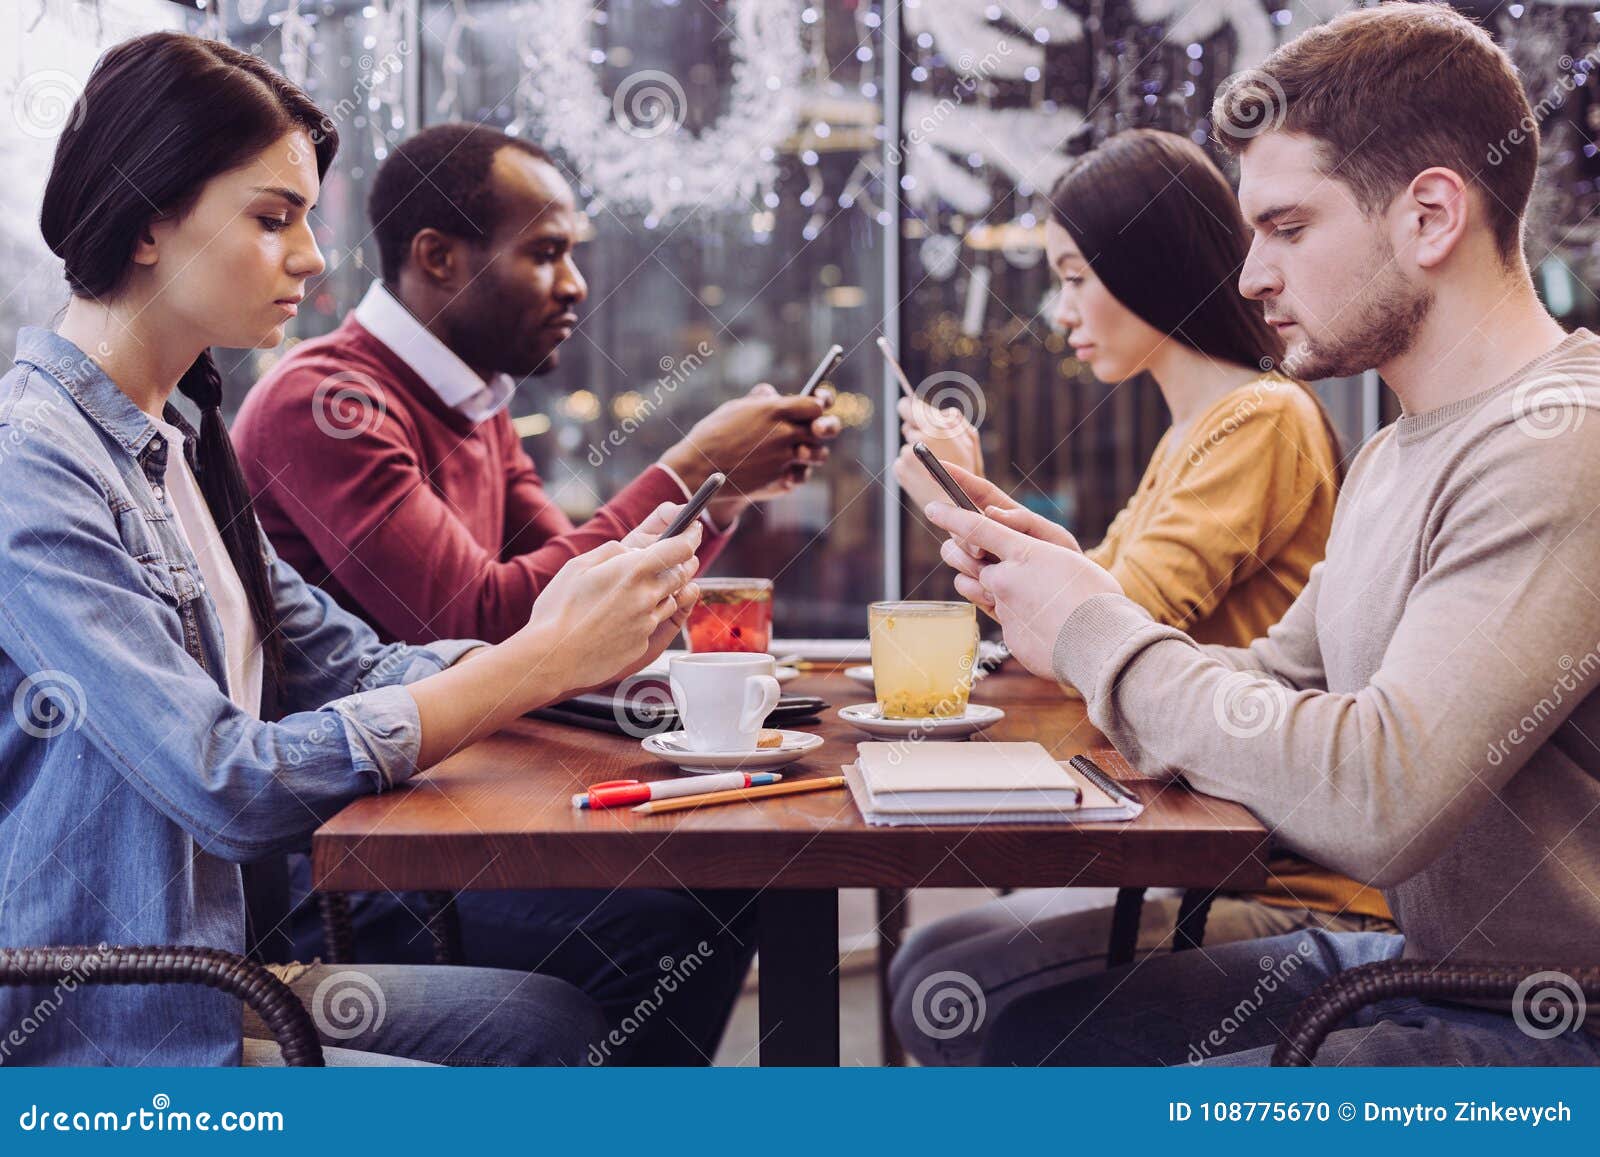 Flat 4 friends. Four friends кафе. People in Modern Lifestyle. Modern Lifestyle. People with smartphones.